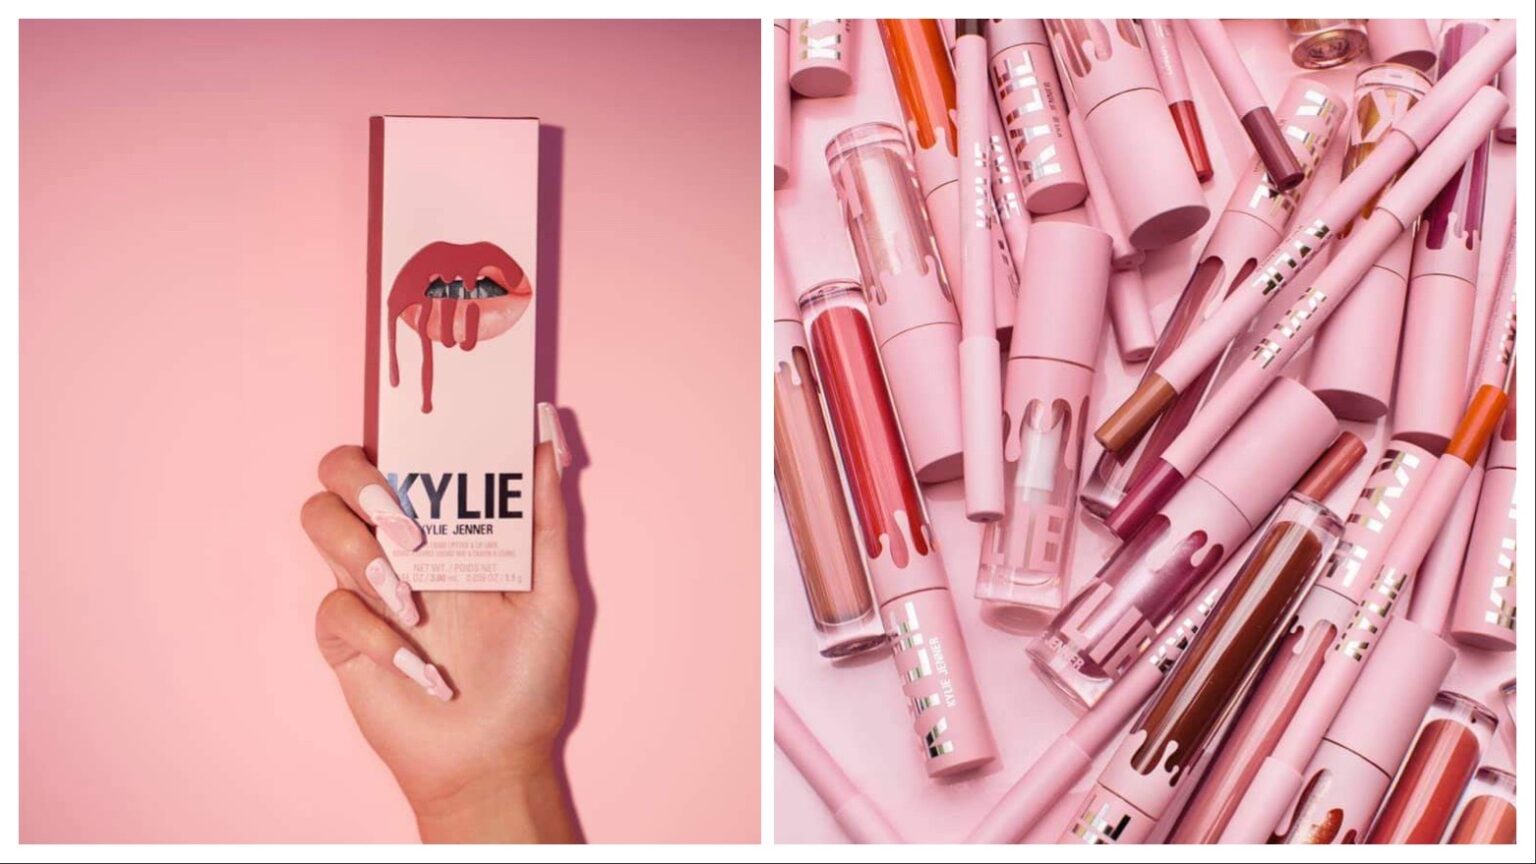 Kylie Jenner S Makeup Line Is Now Fully Vegan